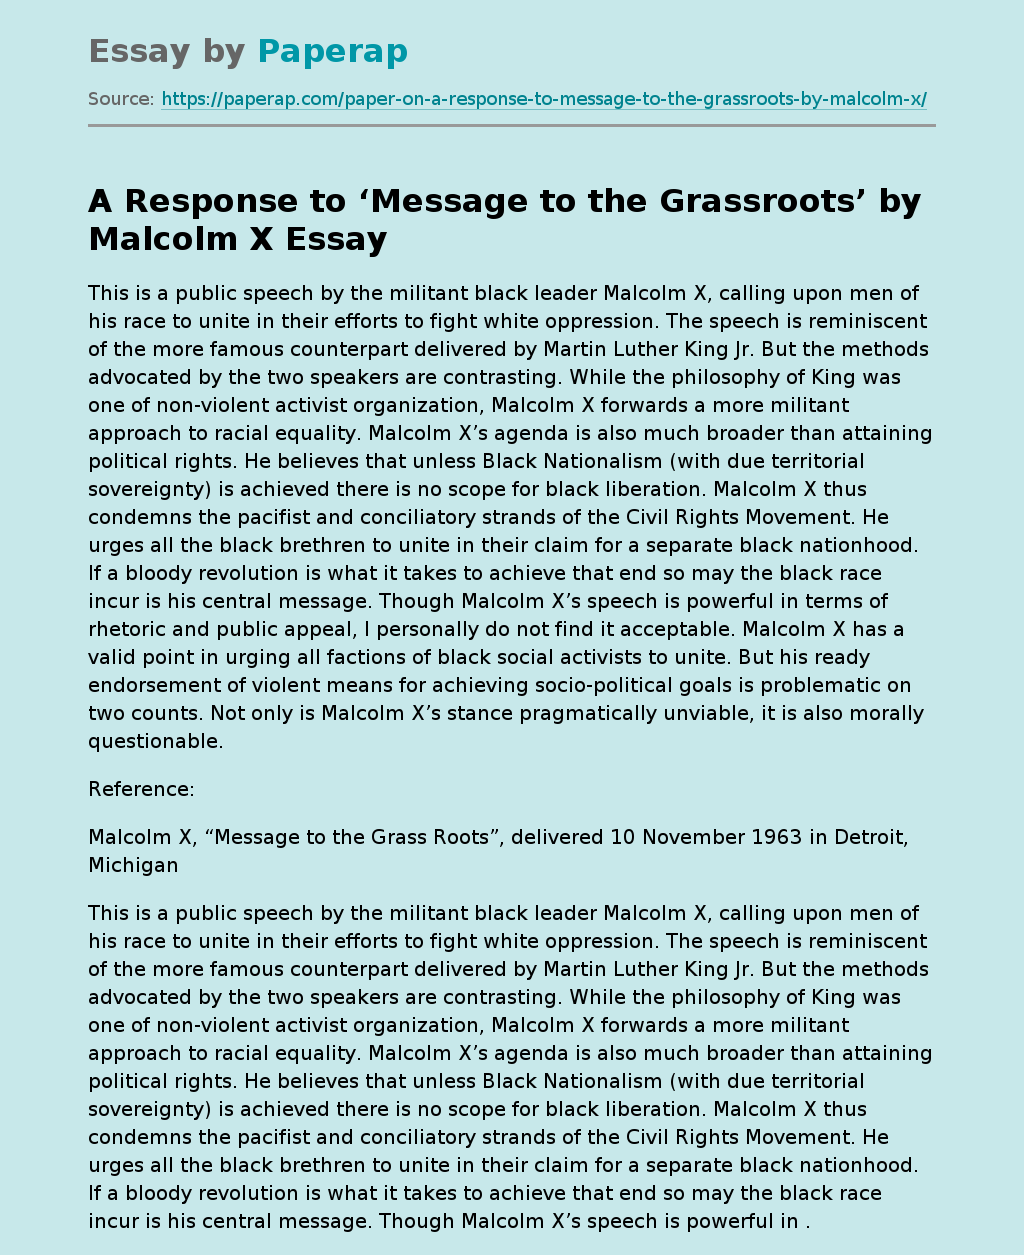 A Response to ‘Message to the Grassroots’ by Malcolm X